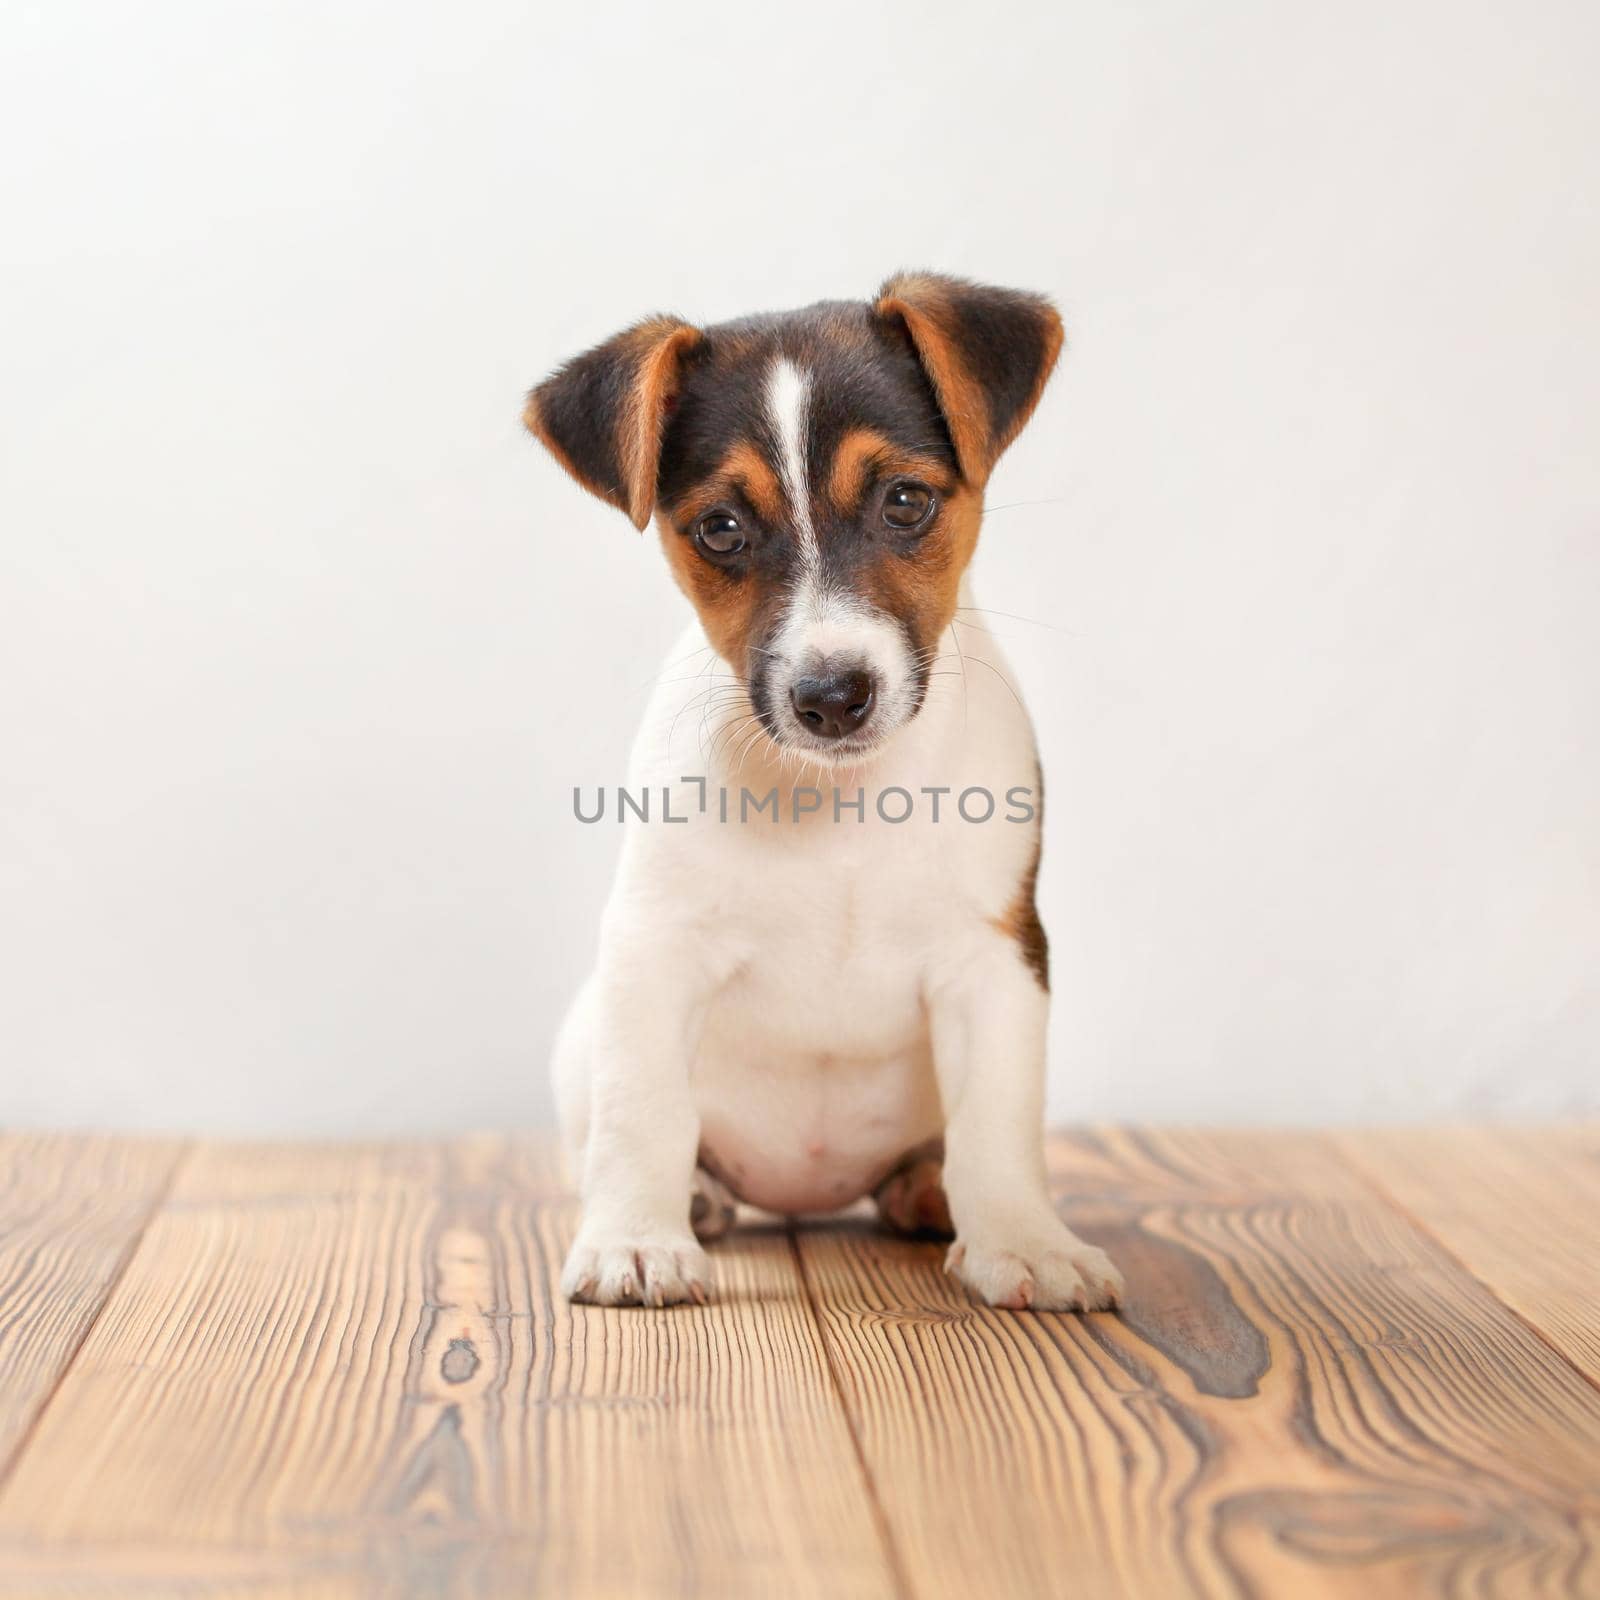 Three months old Jack Russell terrier puppy standing on wooden boards, white background, studio shot. by Ivanko